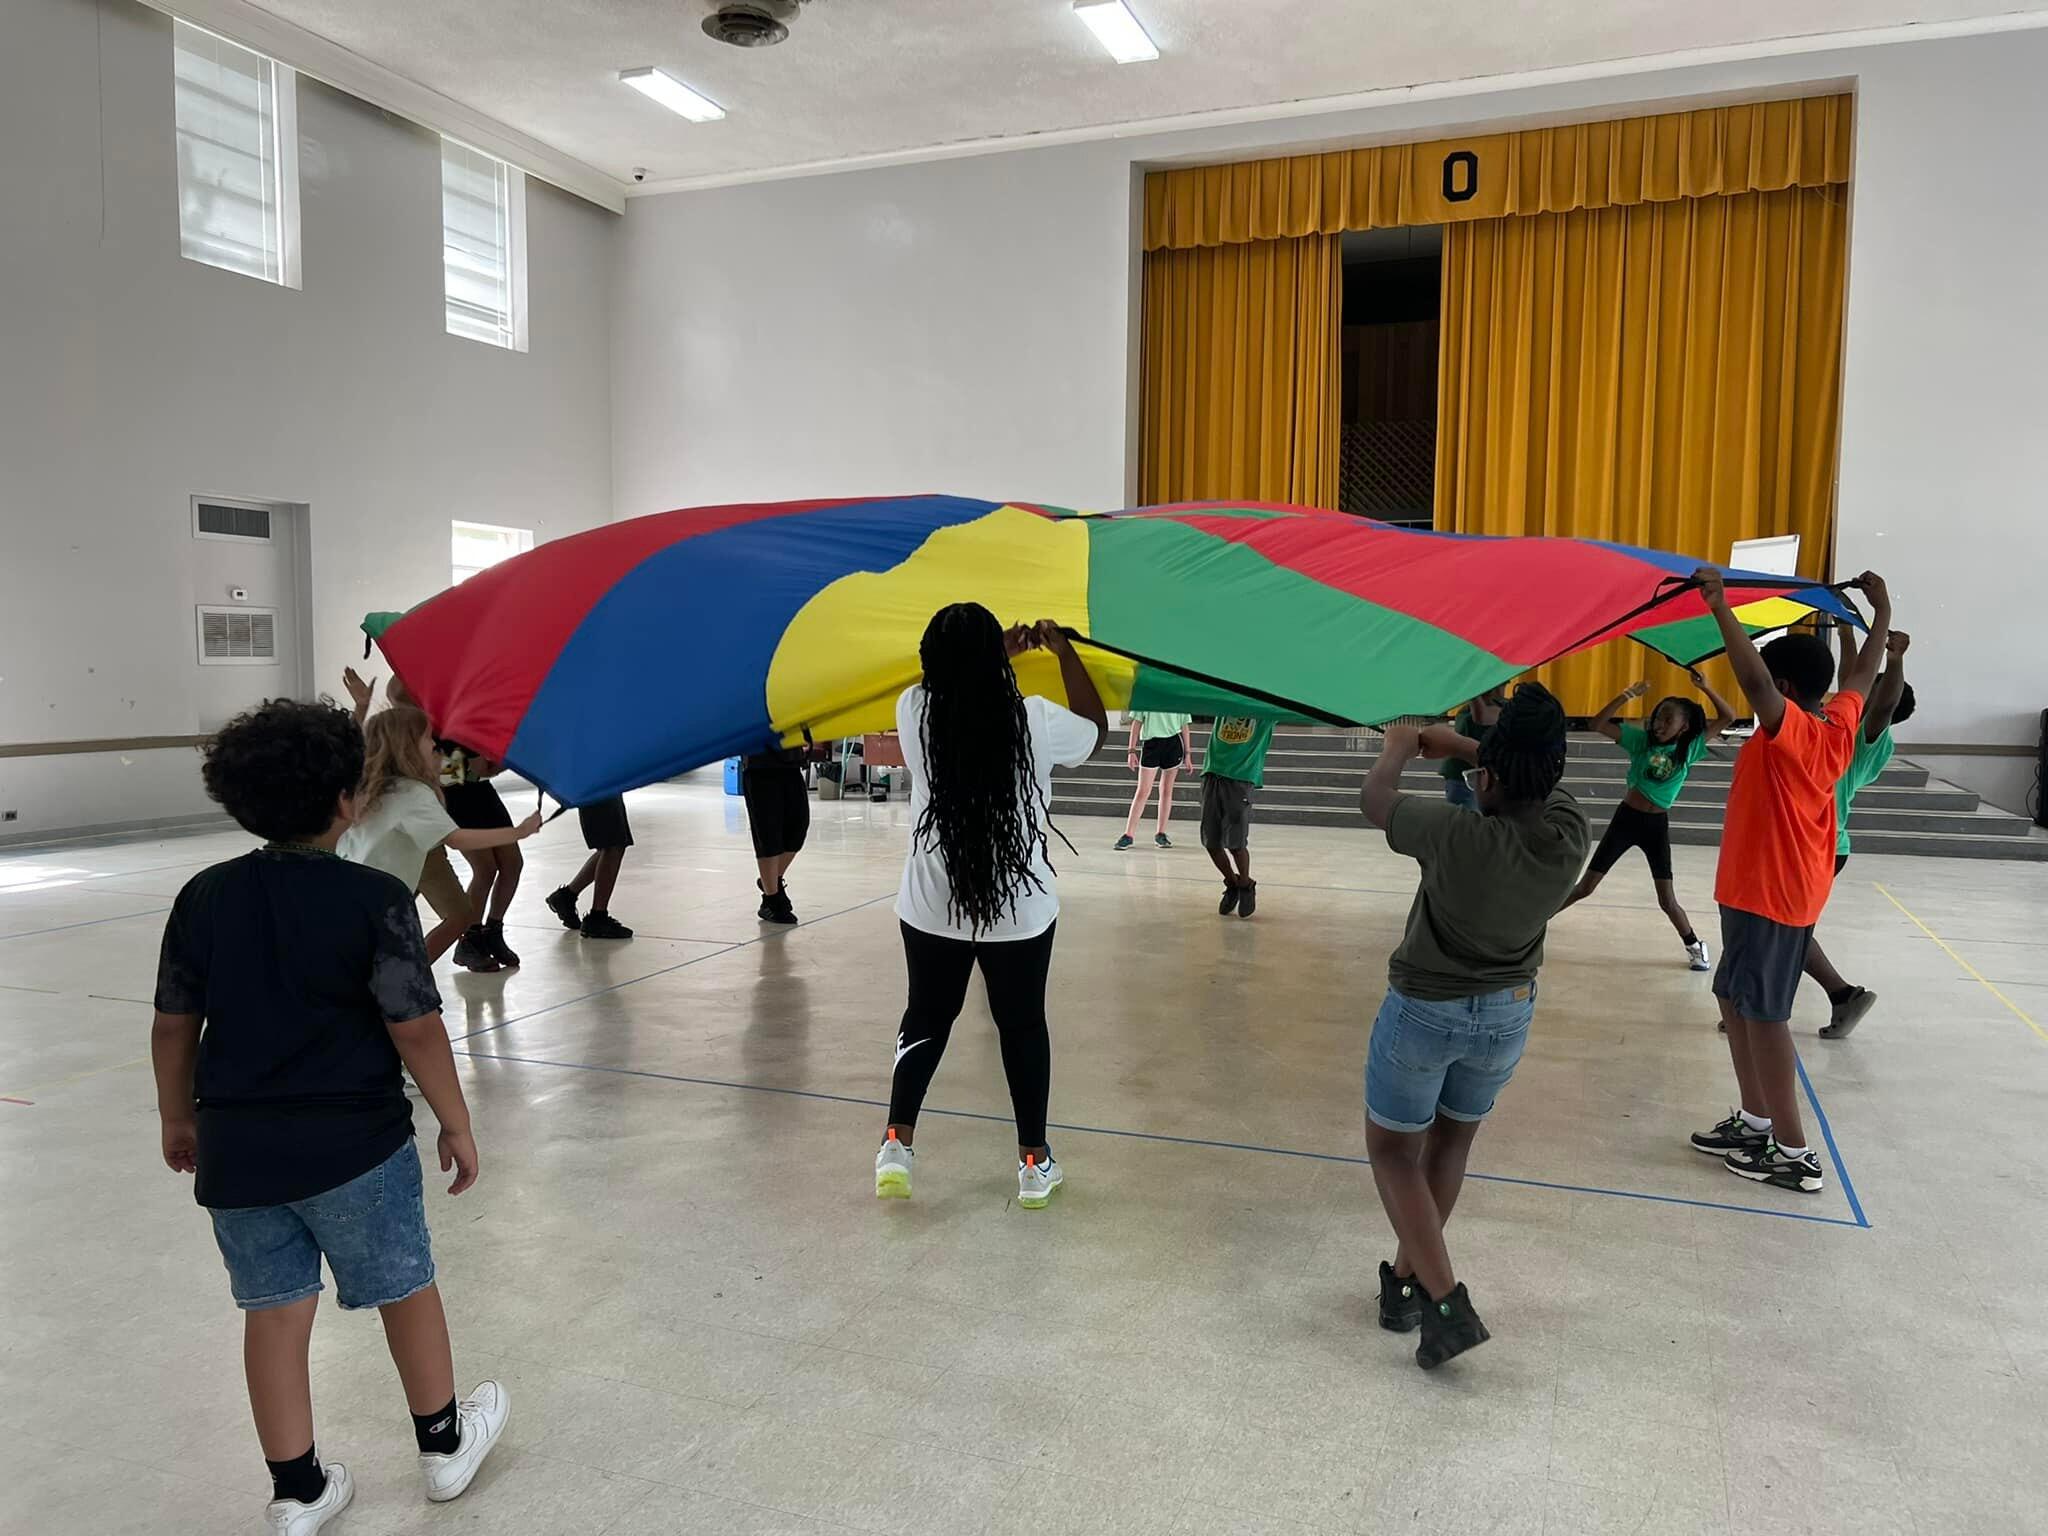 Overstreet students play with a parachute in the gym during Physical Education